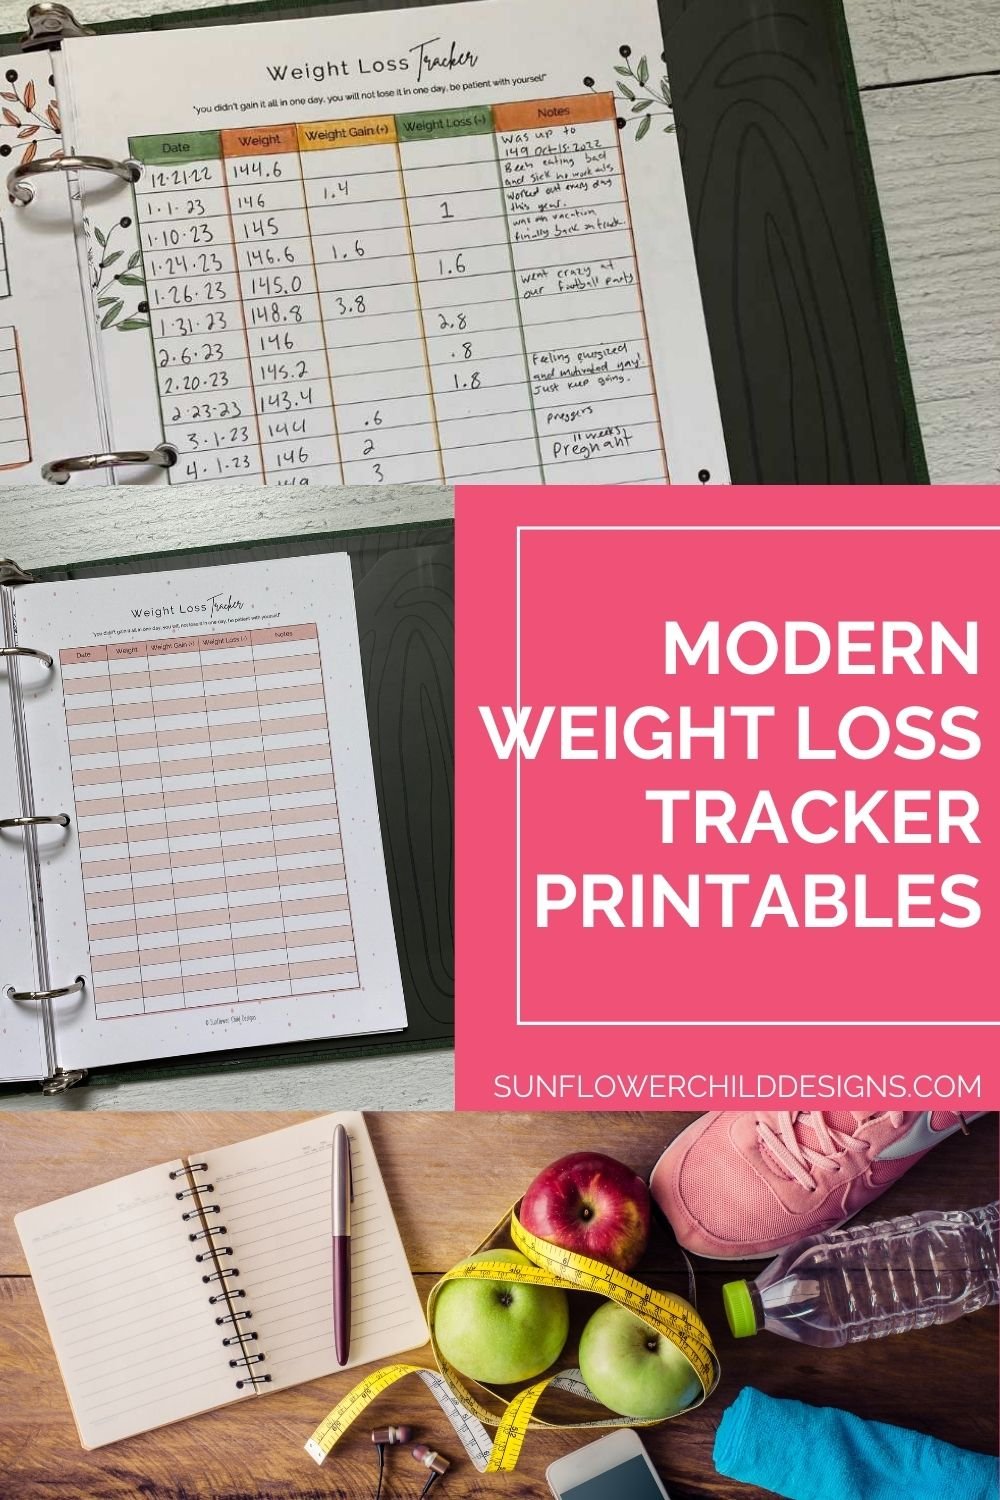 "Kickstart Your Slim-Down Journey with Our Stylish Modern Weight Loss Tracker Printable!"